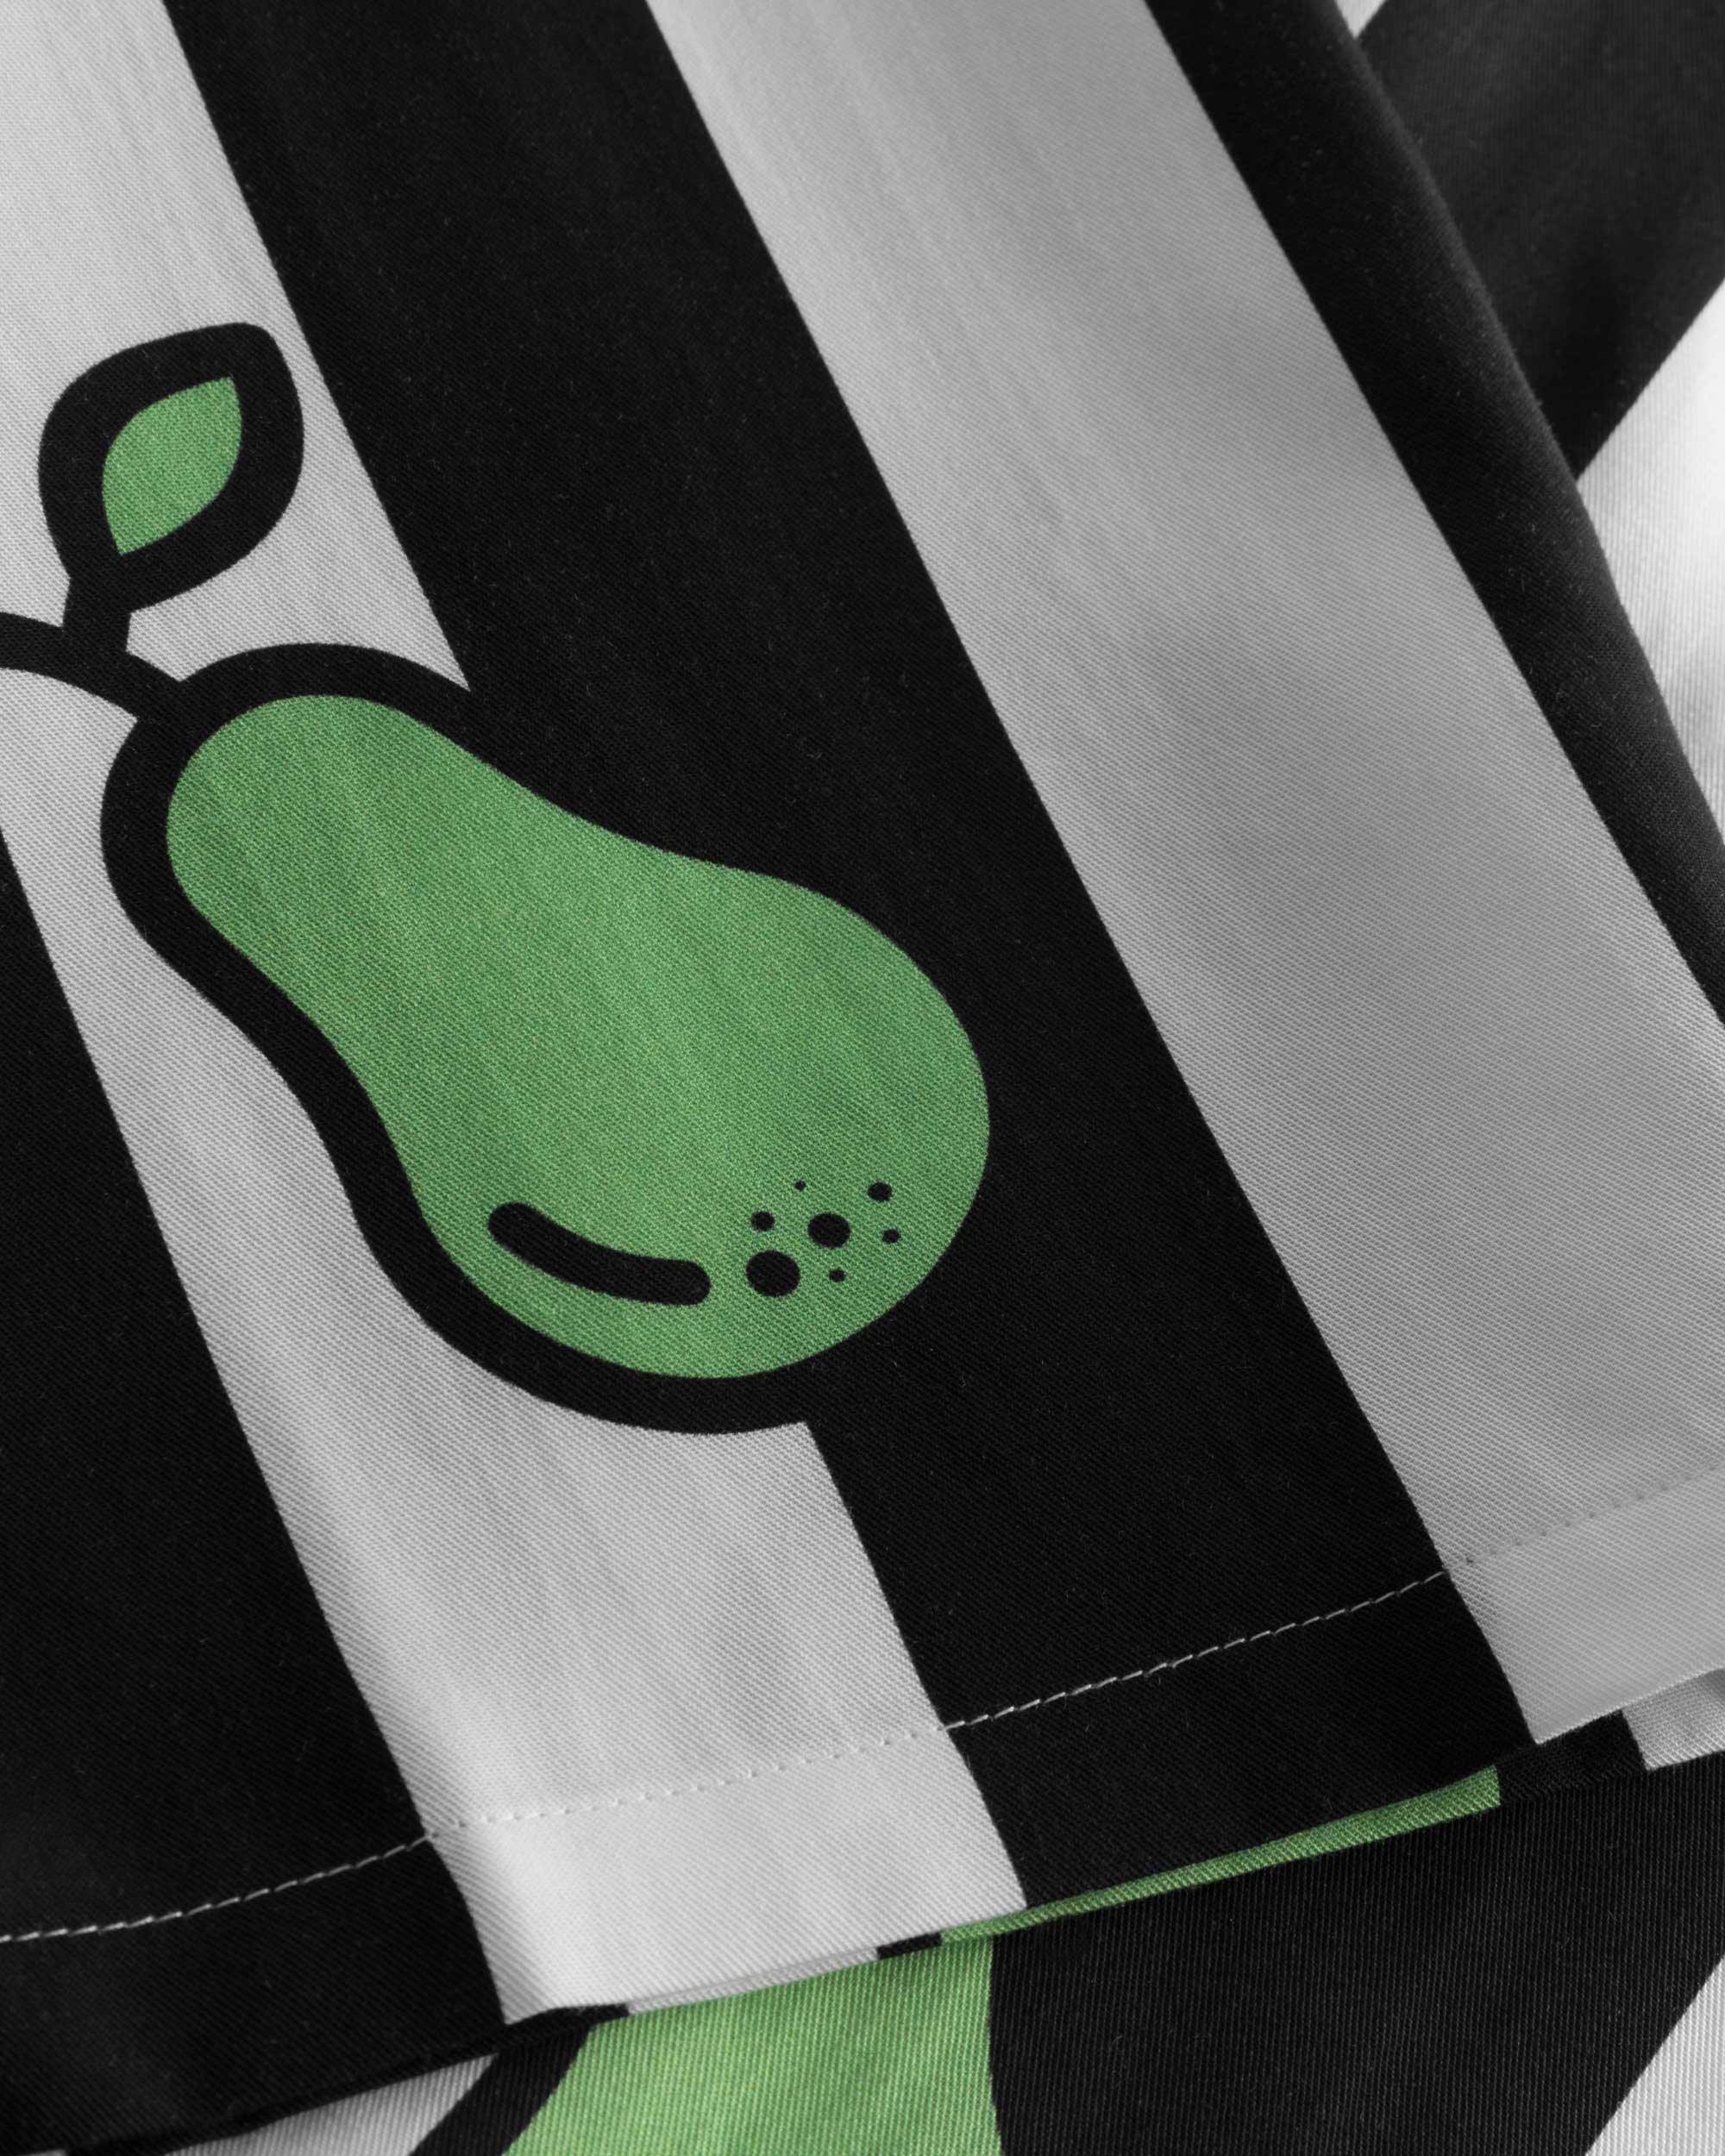 Close-up on stitchings on a black and white short-sleeved vacation shirt with green pear illustrations.